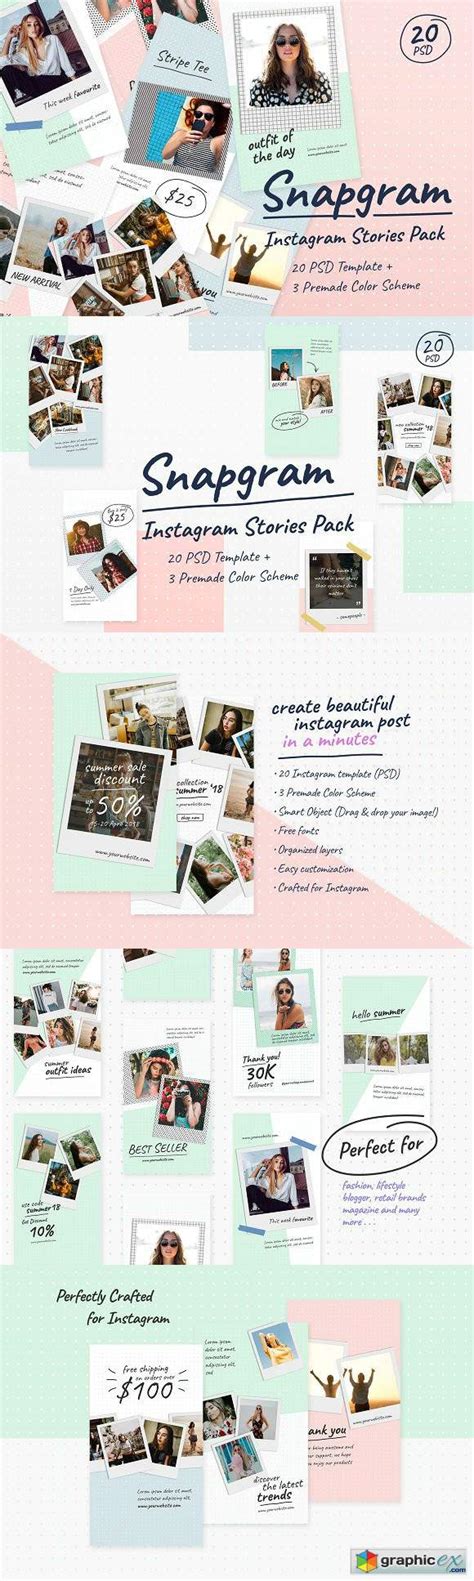 Save, share, and repost stories directly on instagram. Instagram Stories Pack - Snapgram » Free Download Vector ...